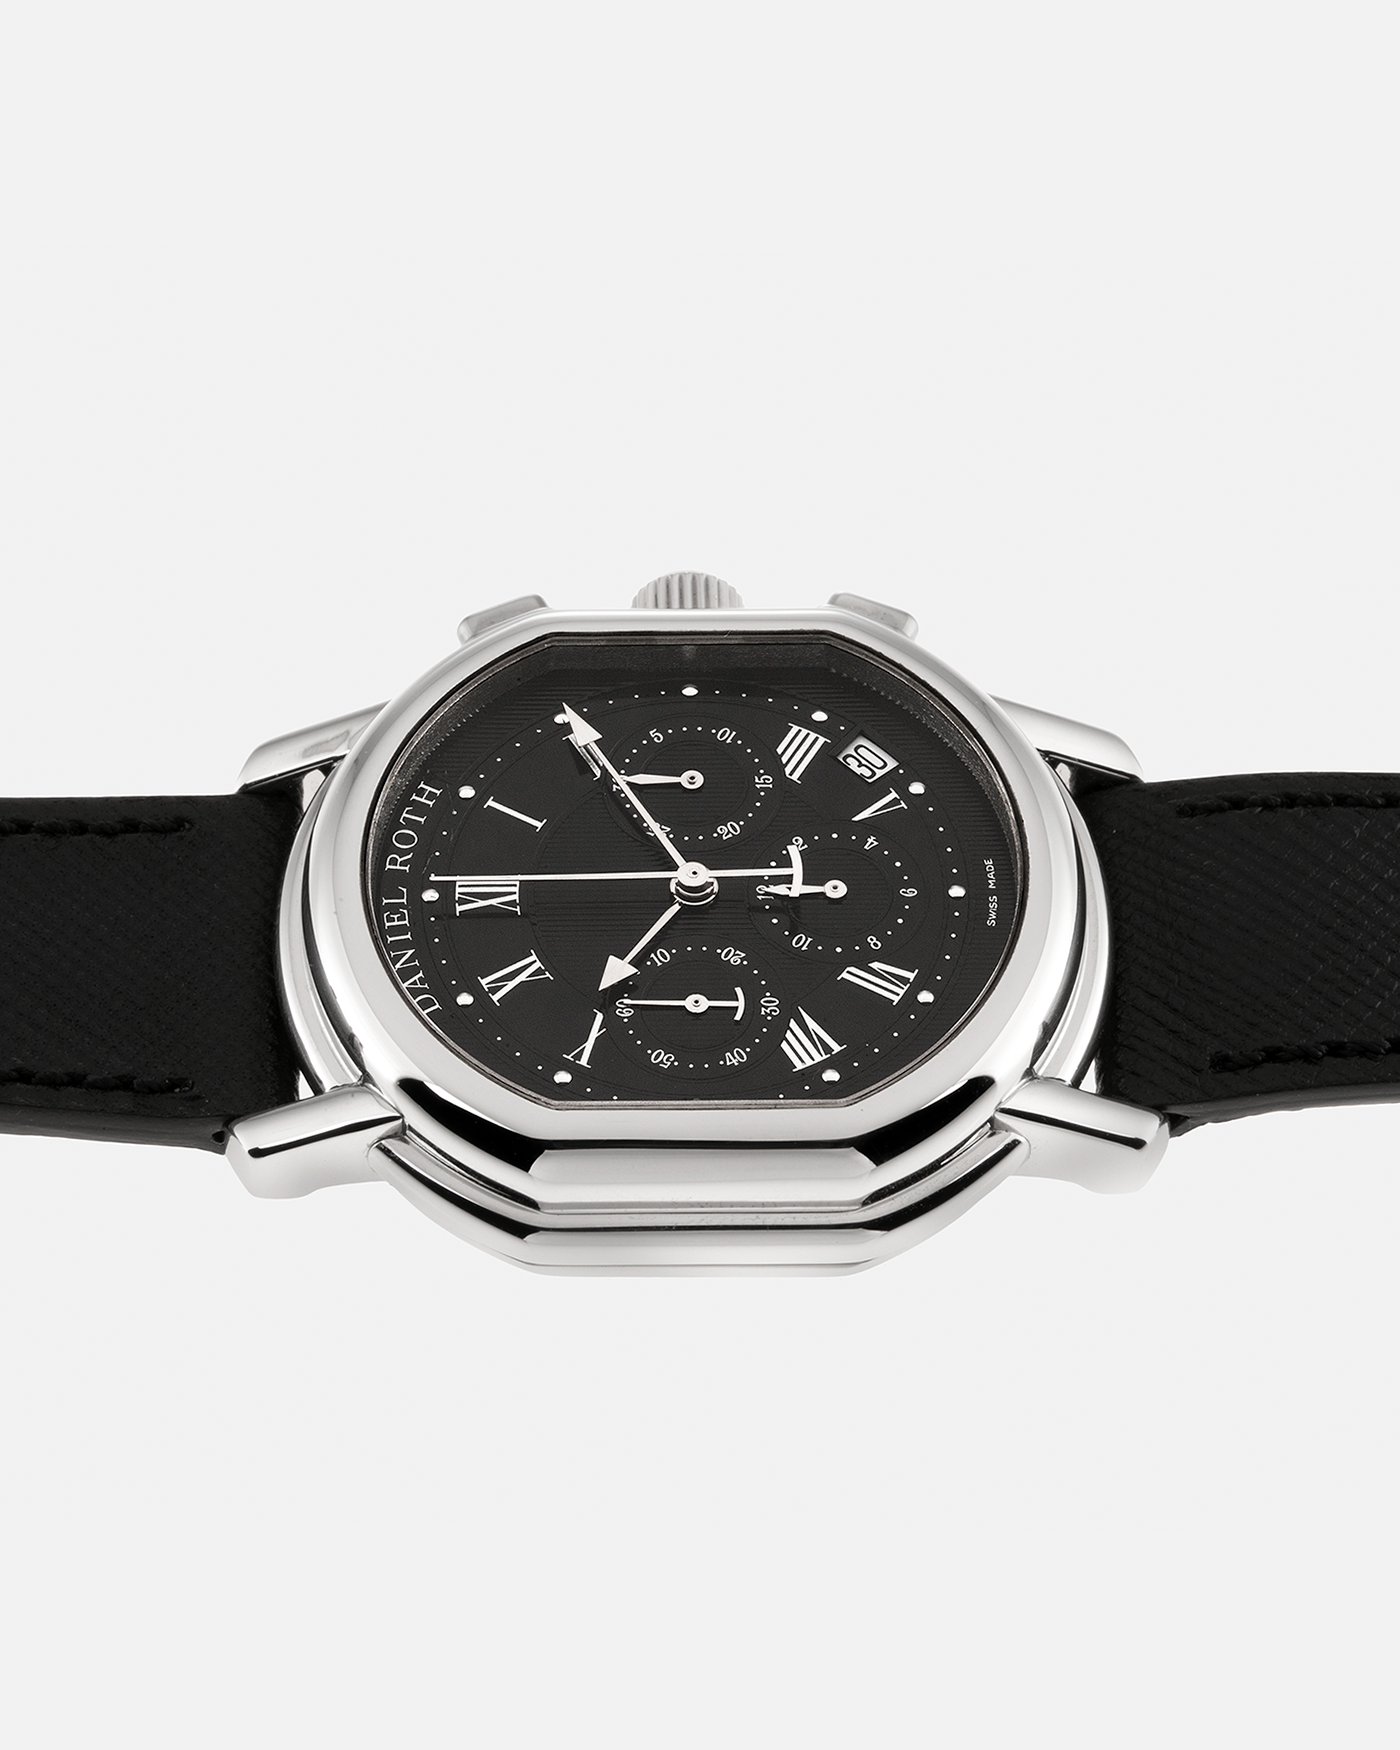 Brand: Daniel Roth Year: Late 1990’s Model: Masters Chronograph S247 Material: Stainless Steel Movement: Zenith El Primero Cal. 400, Self-Winding Case Diameter: 38.5mm x 41.5mm Strap: Molequin Black Grained Calf and Daniel Roth Stainless Steel Tang Buckle